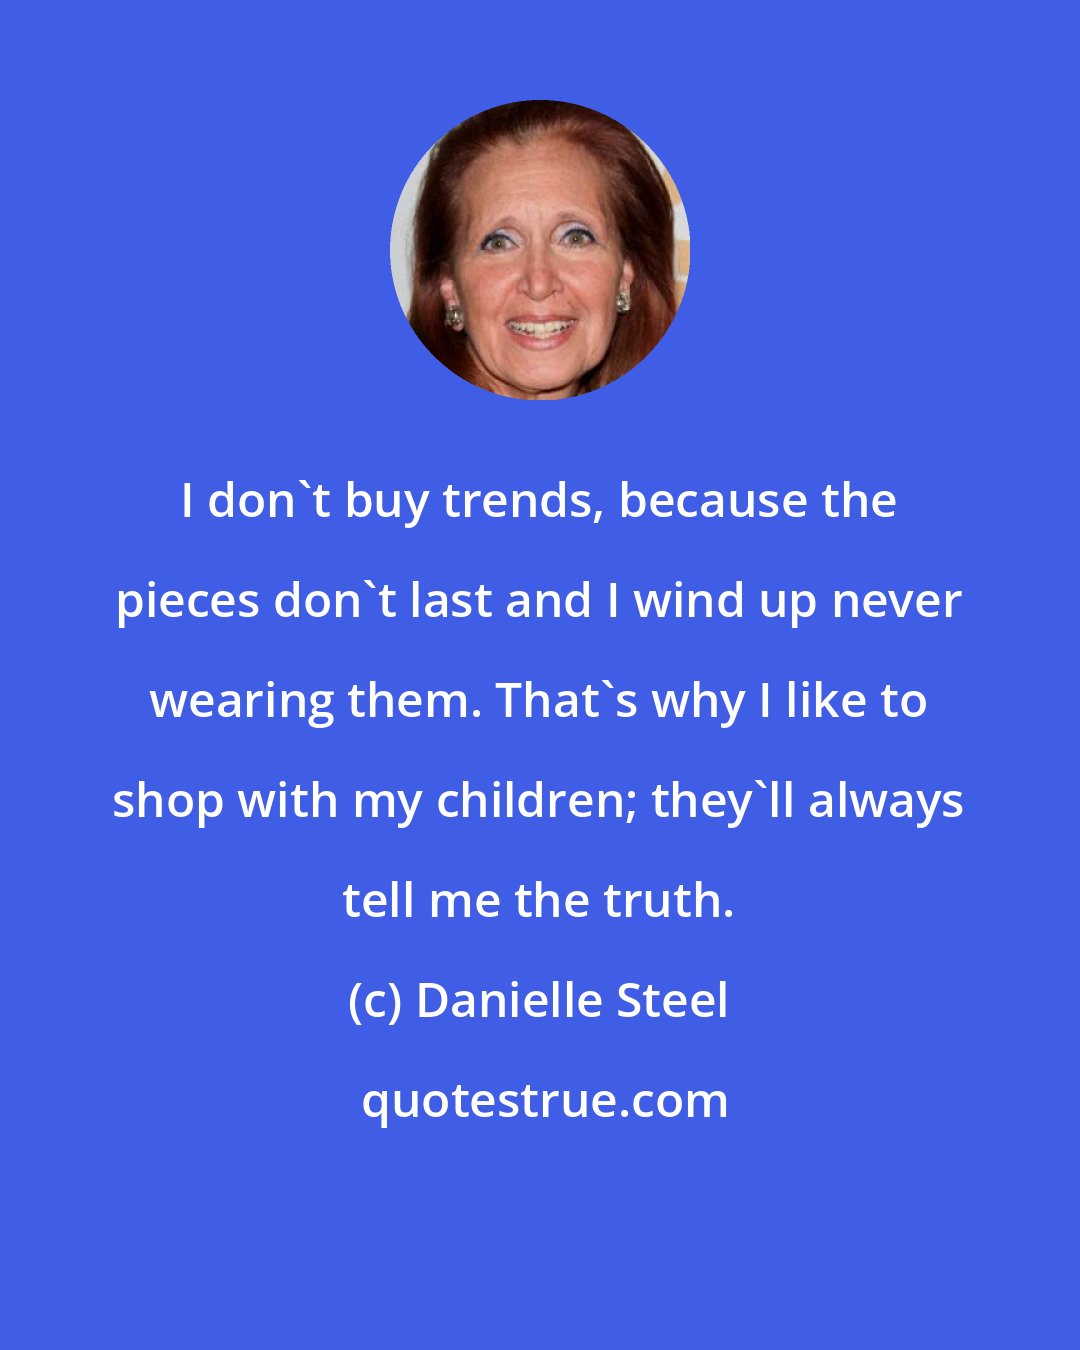 Danielle Steel: I don't buy trends, because the pieces don't last and I wind up never wearing them. That's why I like to shop with my children; they'll always tell me the truth.